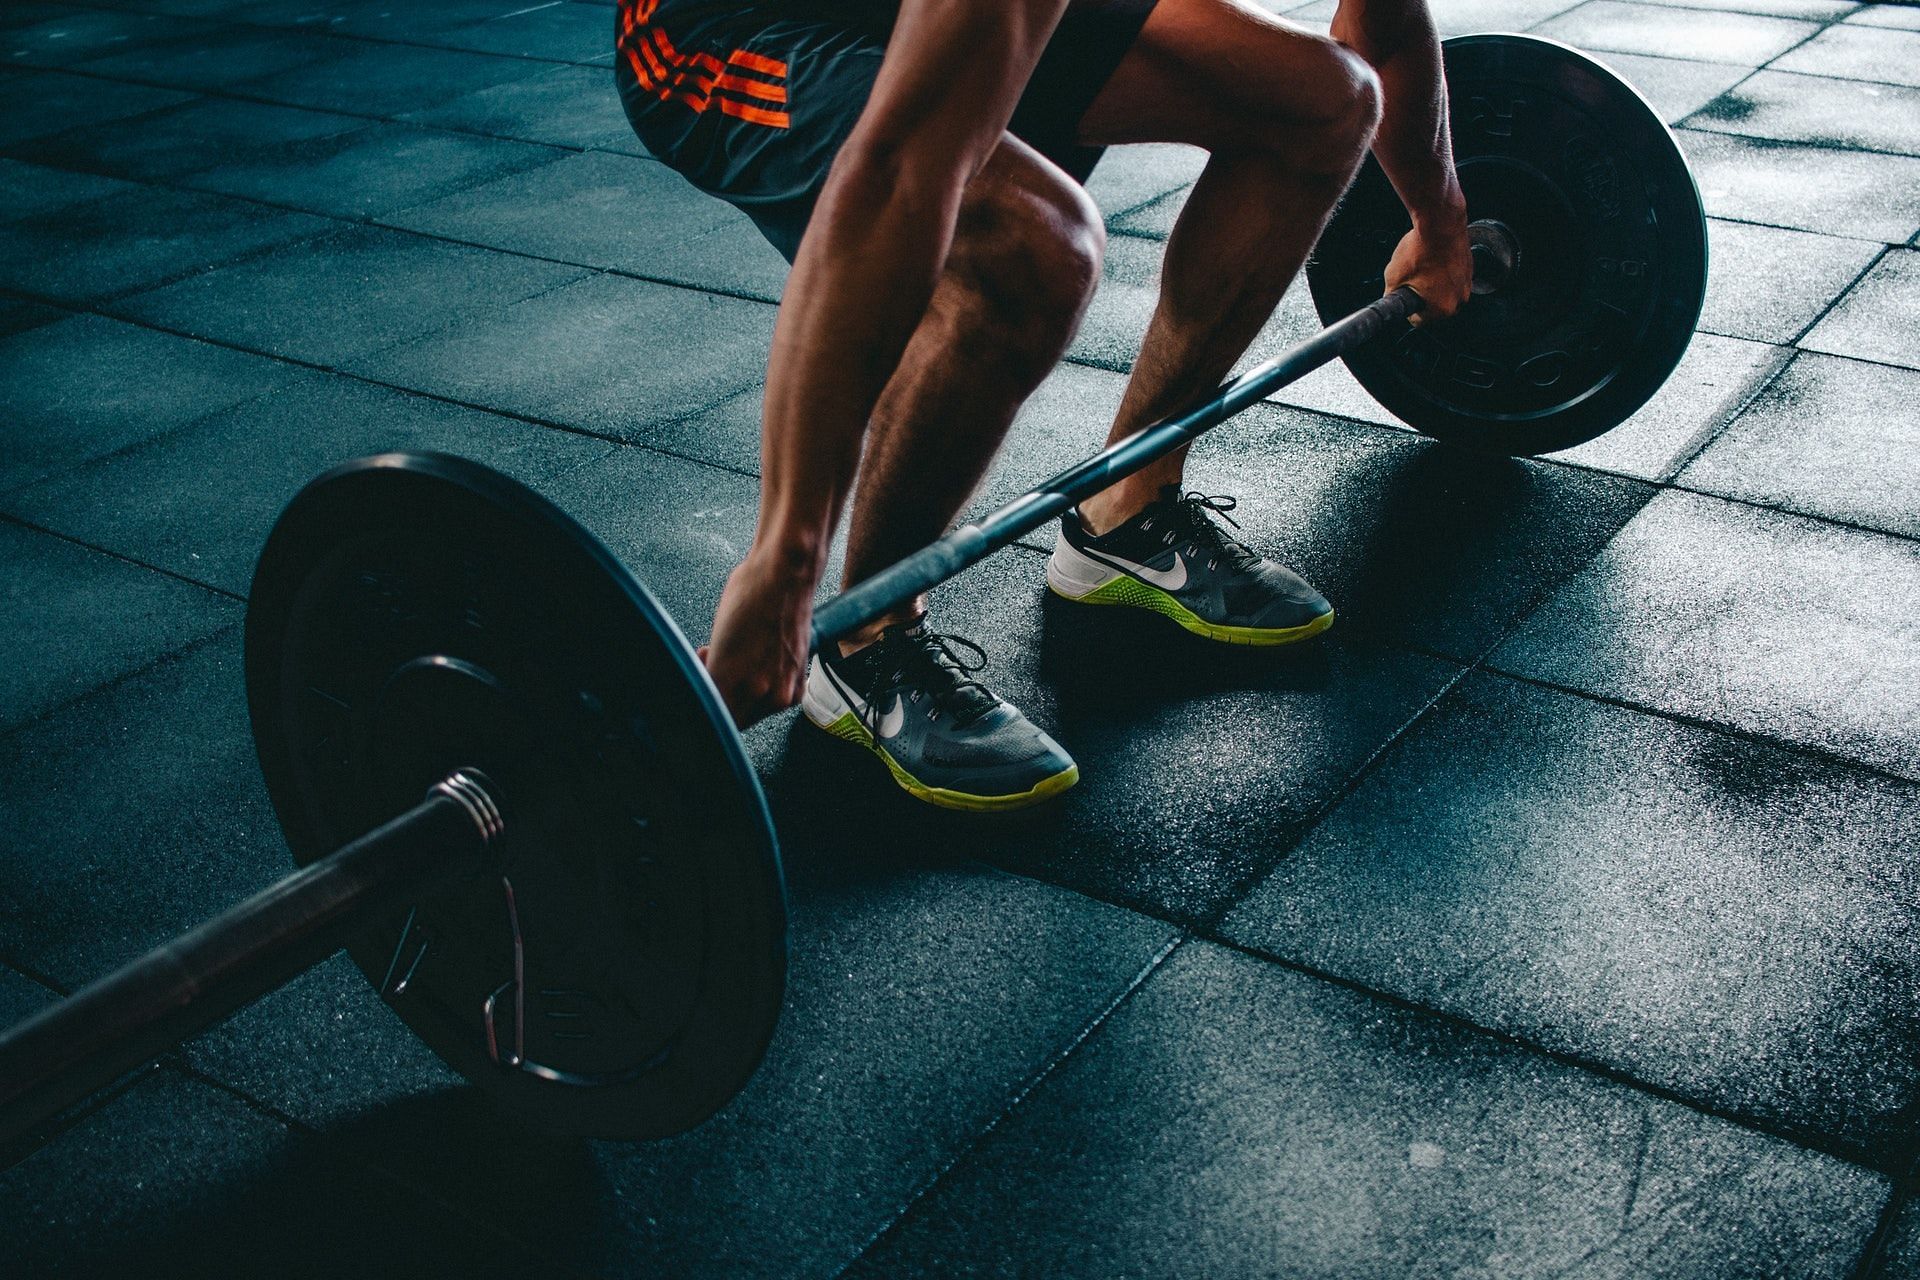 Strength training is an important part of any workout routine.(Photo by Victor Freitas via pexels)